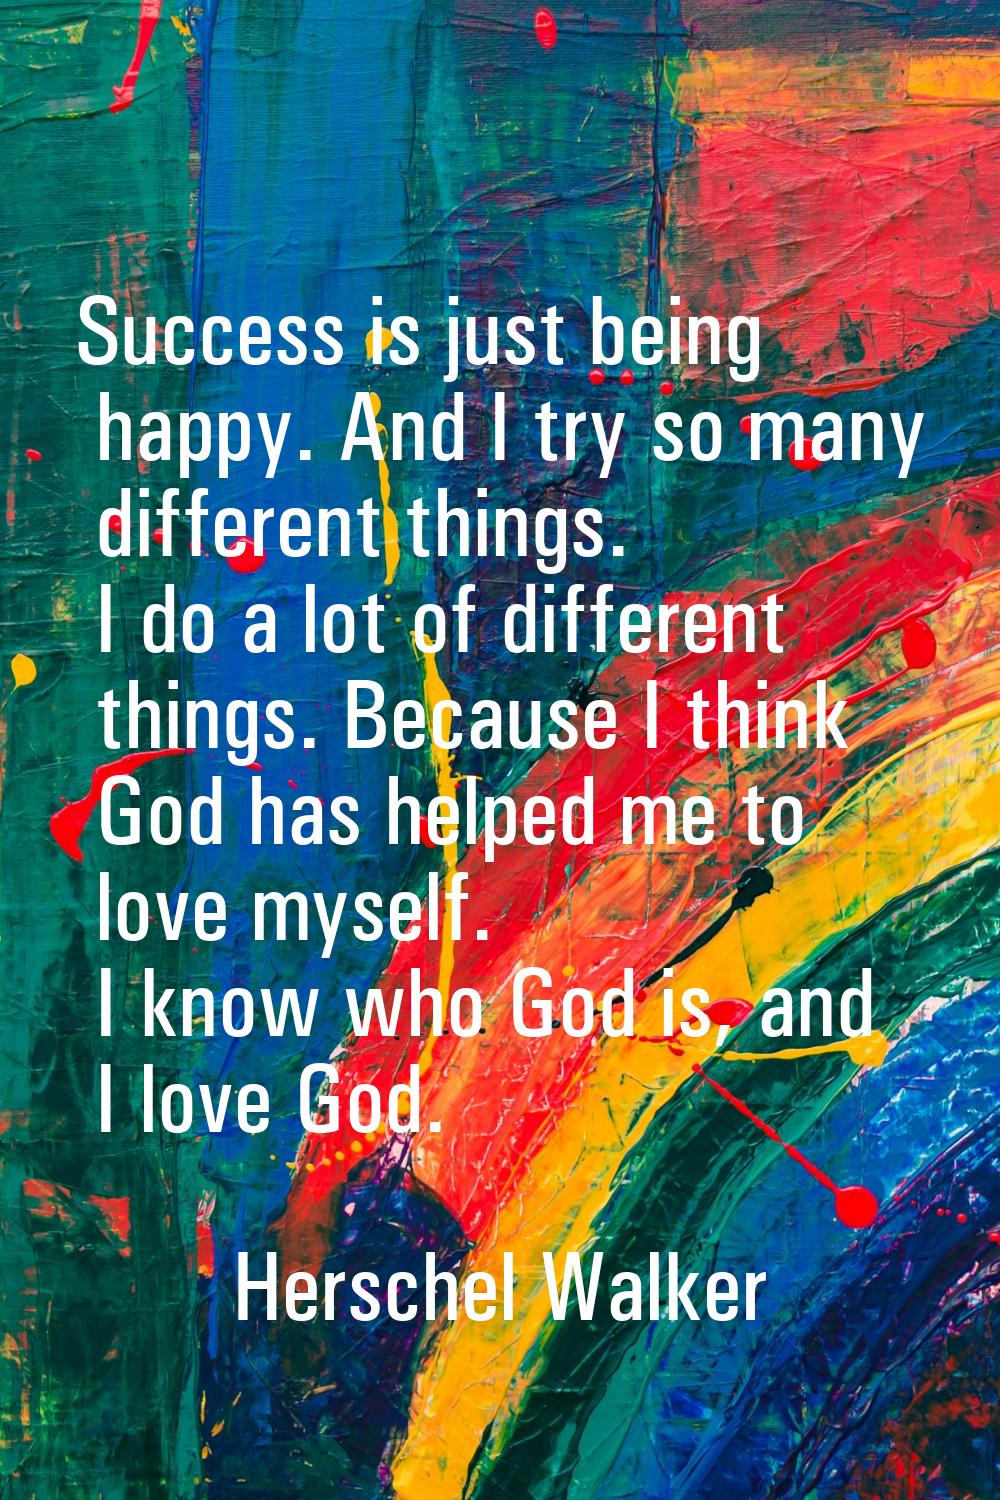 Success is just being happy. And I try so many different things. I do a lot of different things. Be